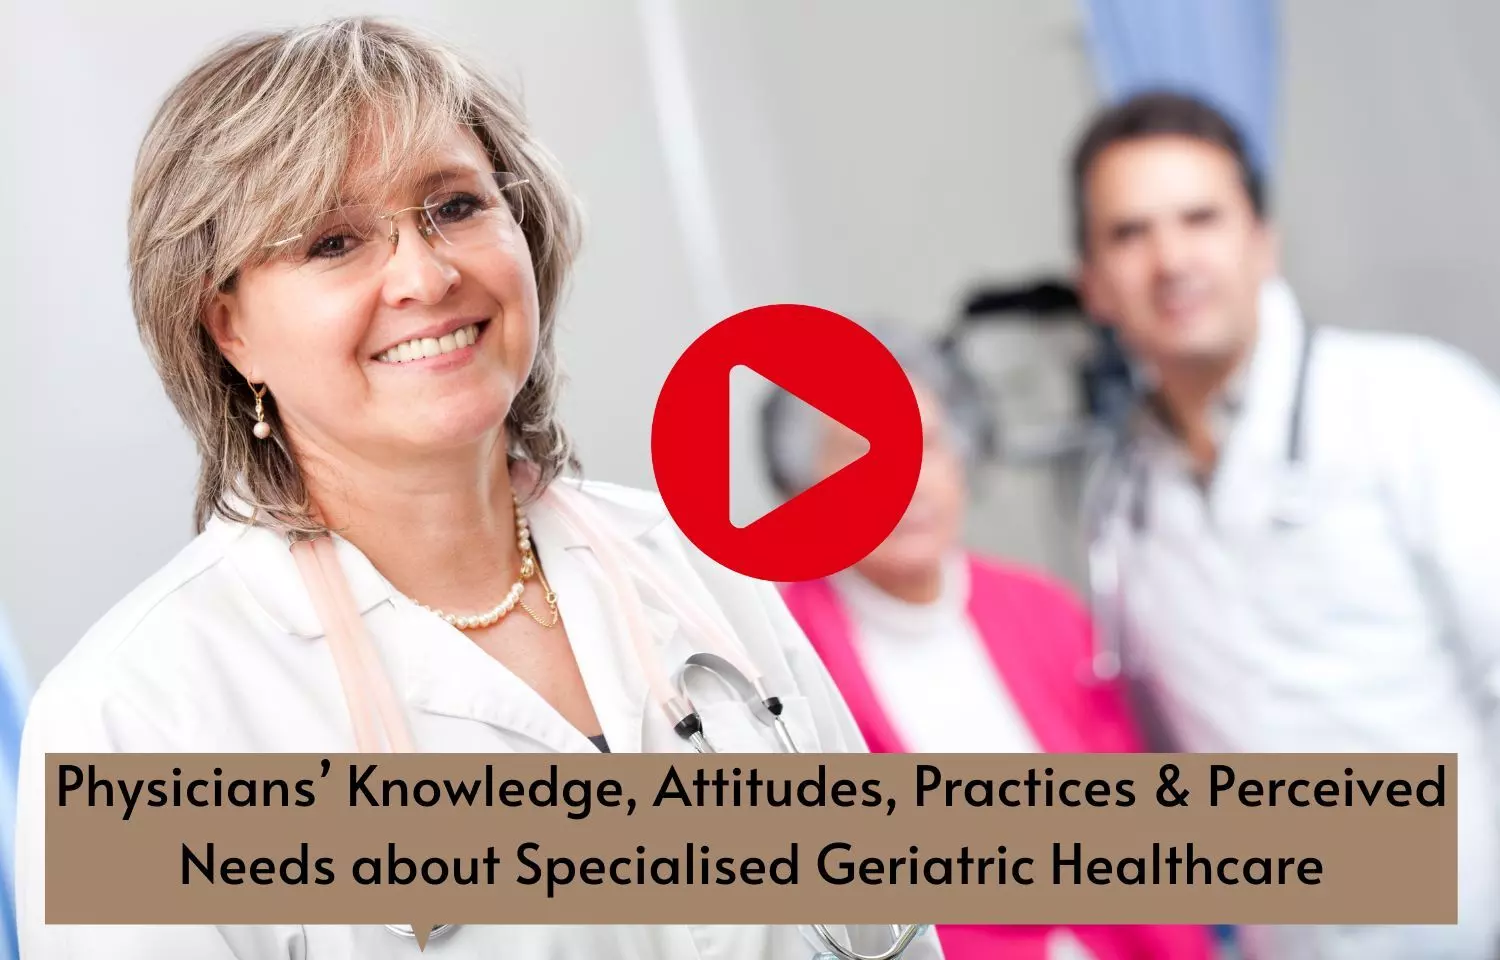 Physicians Knowledge, Attitudes, Practices & Perceived Needs about Specialised Geriatric Healthcare